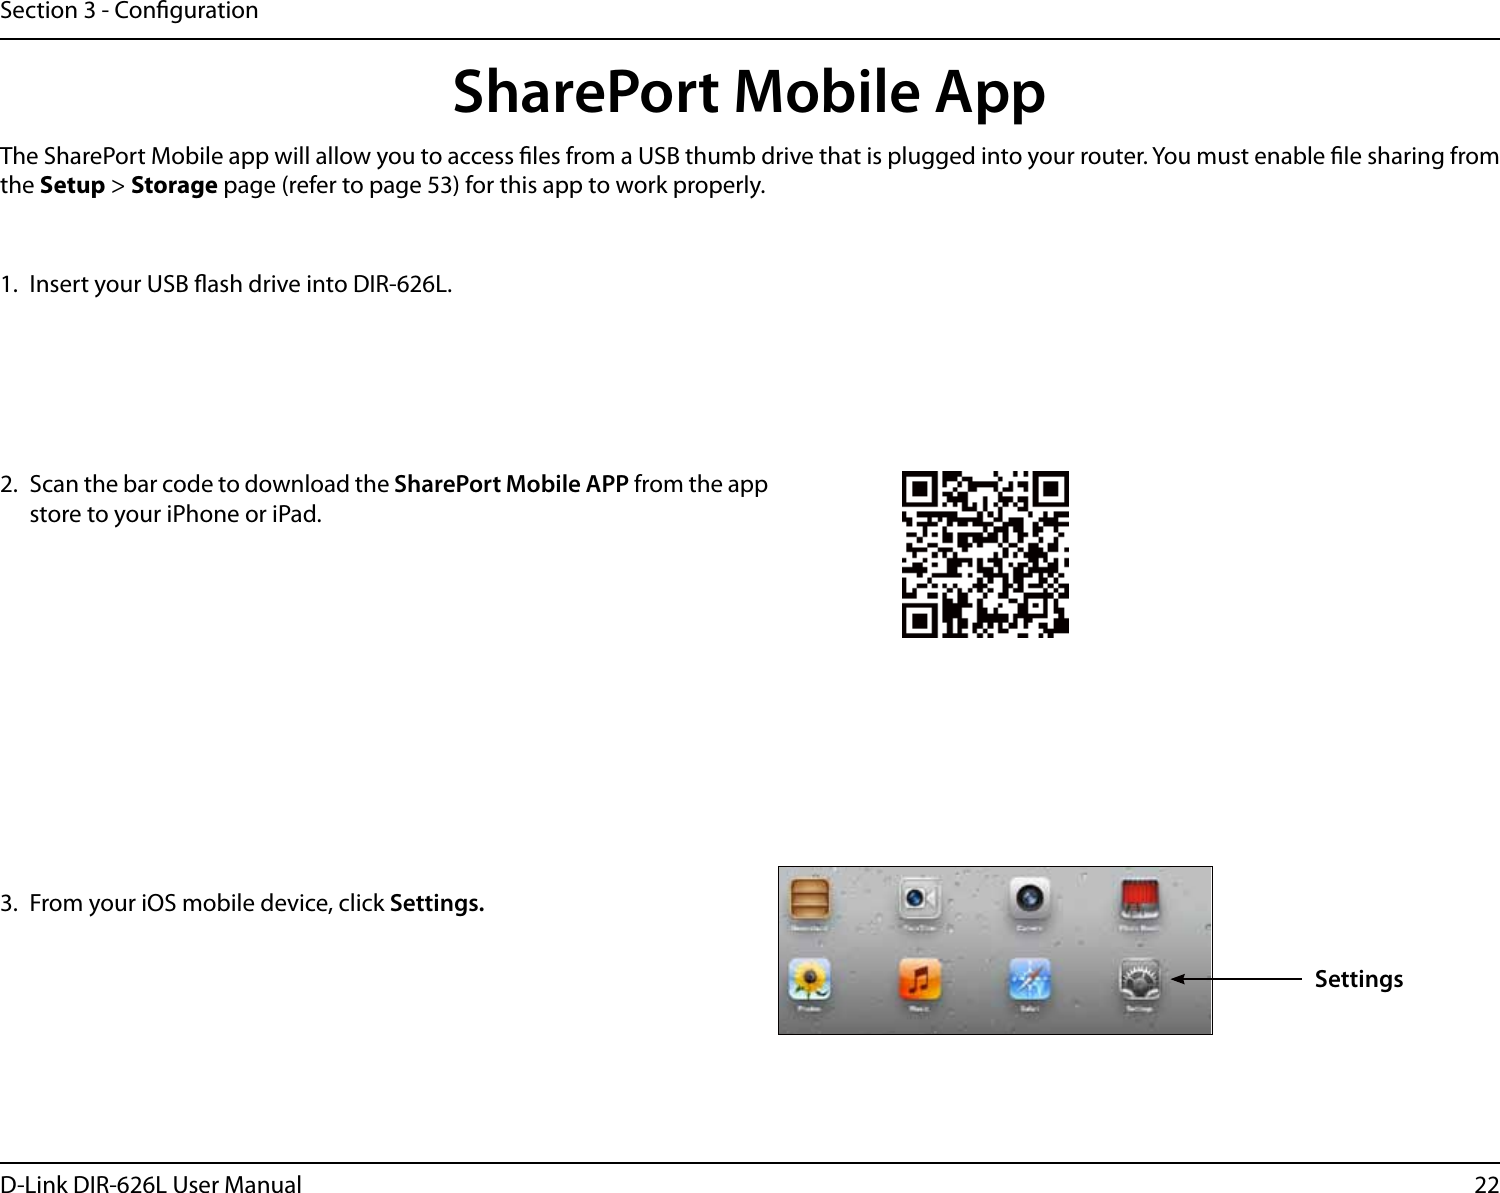 22D-Link DIR-626L User ManualSection 3 - Conguration1.  Insert your USB ash drive into DIR-626L.2.  Scan the bar code to download the SharePort Mobile APP from the app store to your iPhone or iPad.SharePort Mobile App3.  From your iOS mobile device, click Settings. The SharePort Mobile app will allow you to access les from a USB thumb drive that is plugged into your router. You must enable le sharing from the Setup &gt; Storage page (refer to page 53) for this app to work properly.Settings